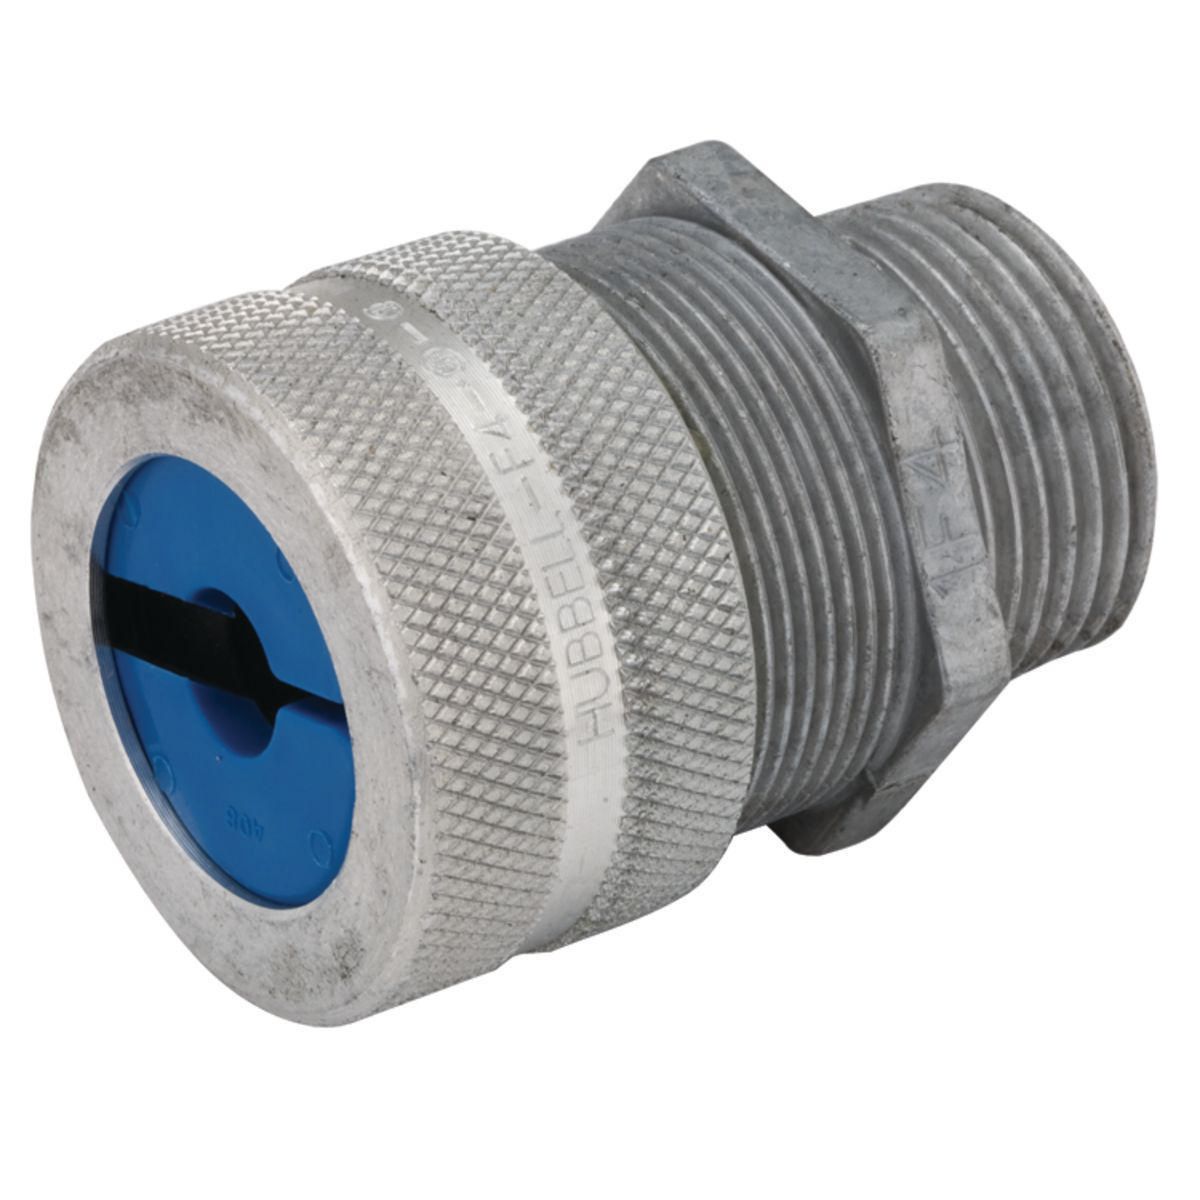 Aluminum and Steel Liquidtight Strain Relief Cord and Cable Connectors, Commercial Cable and Cord Fittings